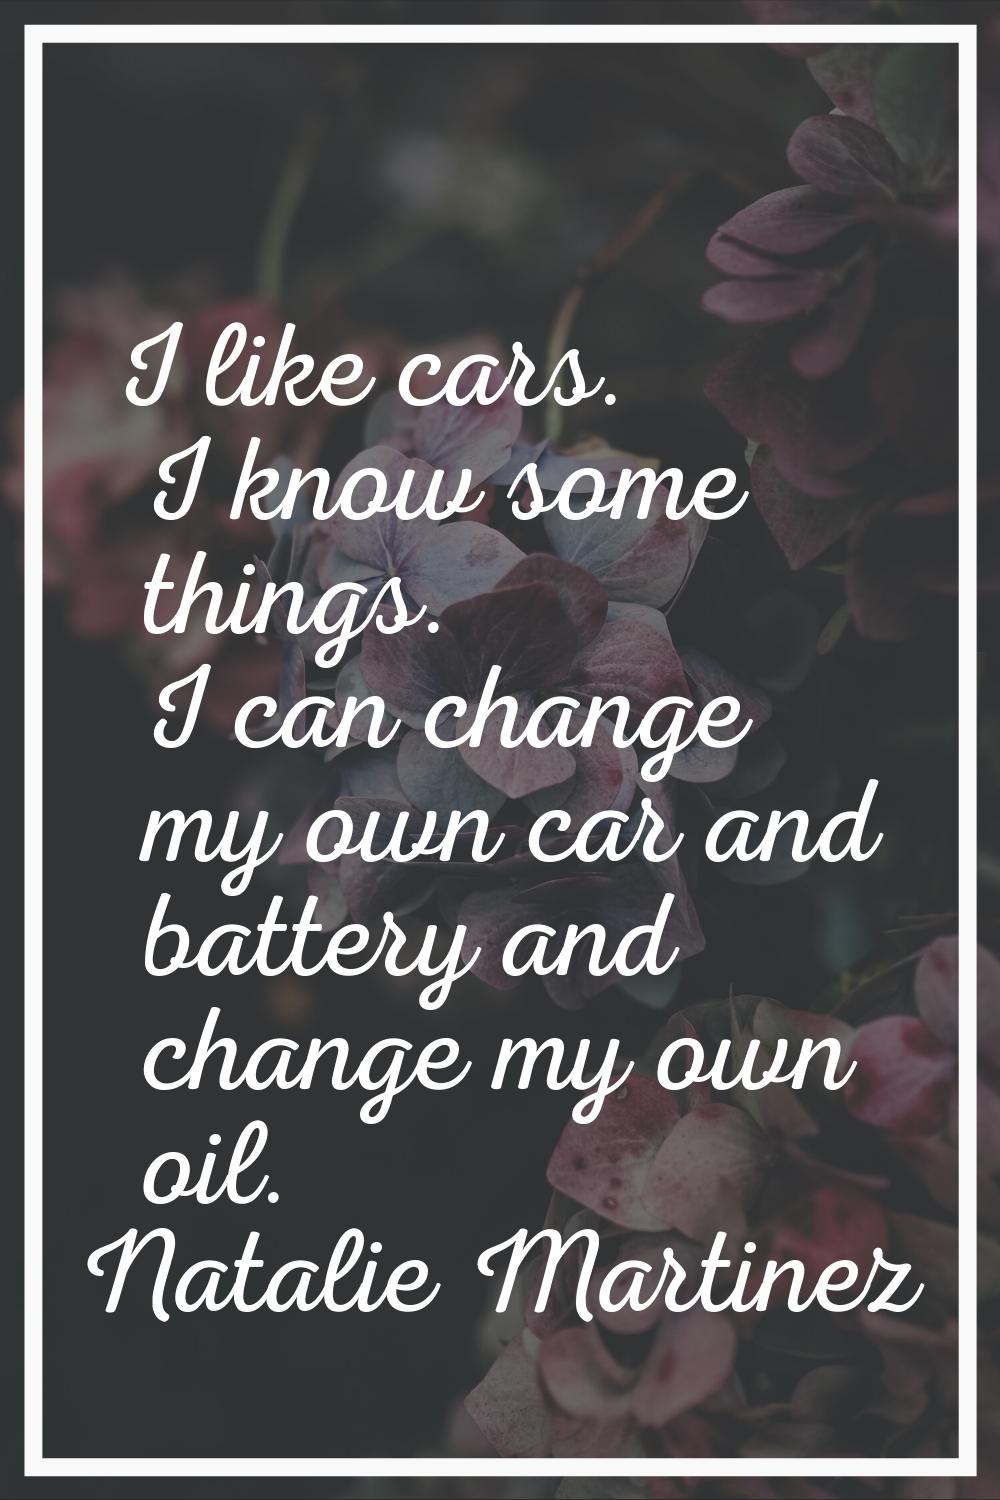 I like cars. I know some things. I can change my own car and battery and change my own oil.